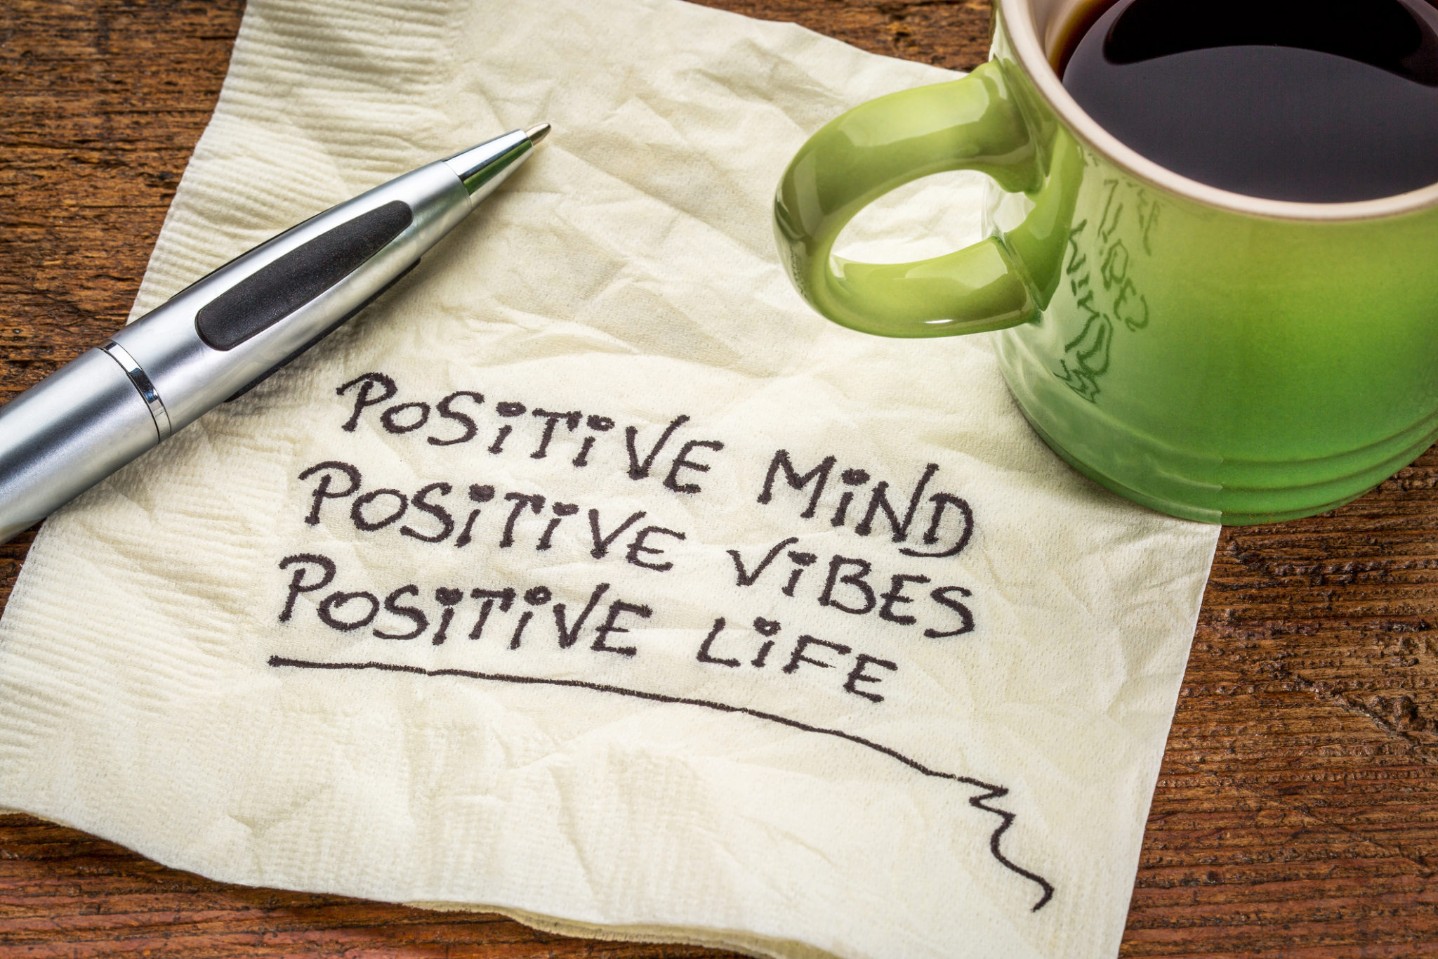 positive mind, vibes and life written on a napkin